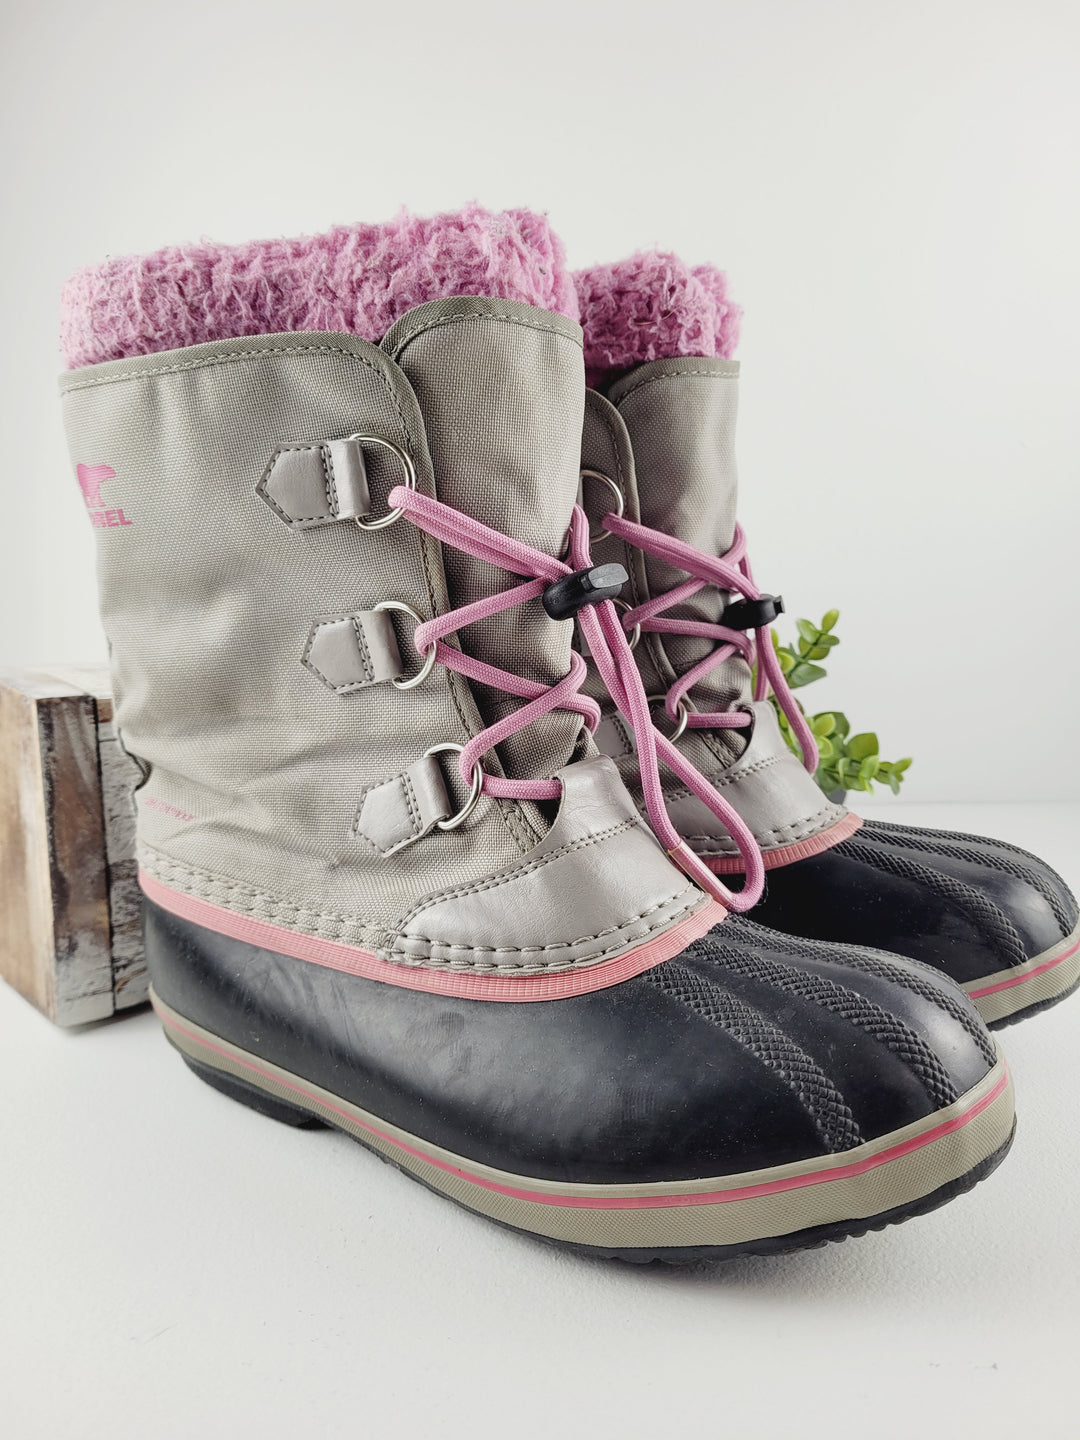 SOREL WINTER BOOTS GREY/PINK YOUTH SIZE 6 EUC/VGUC